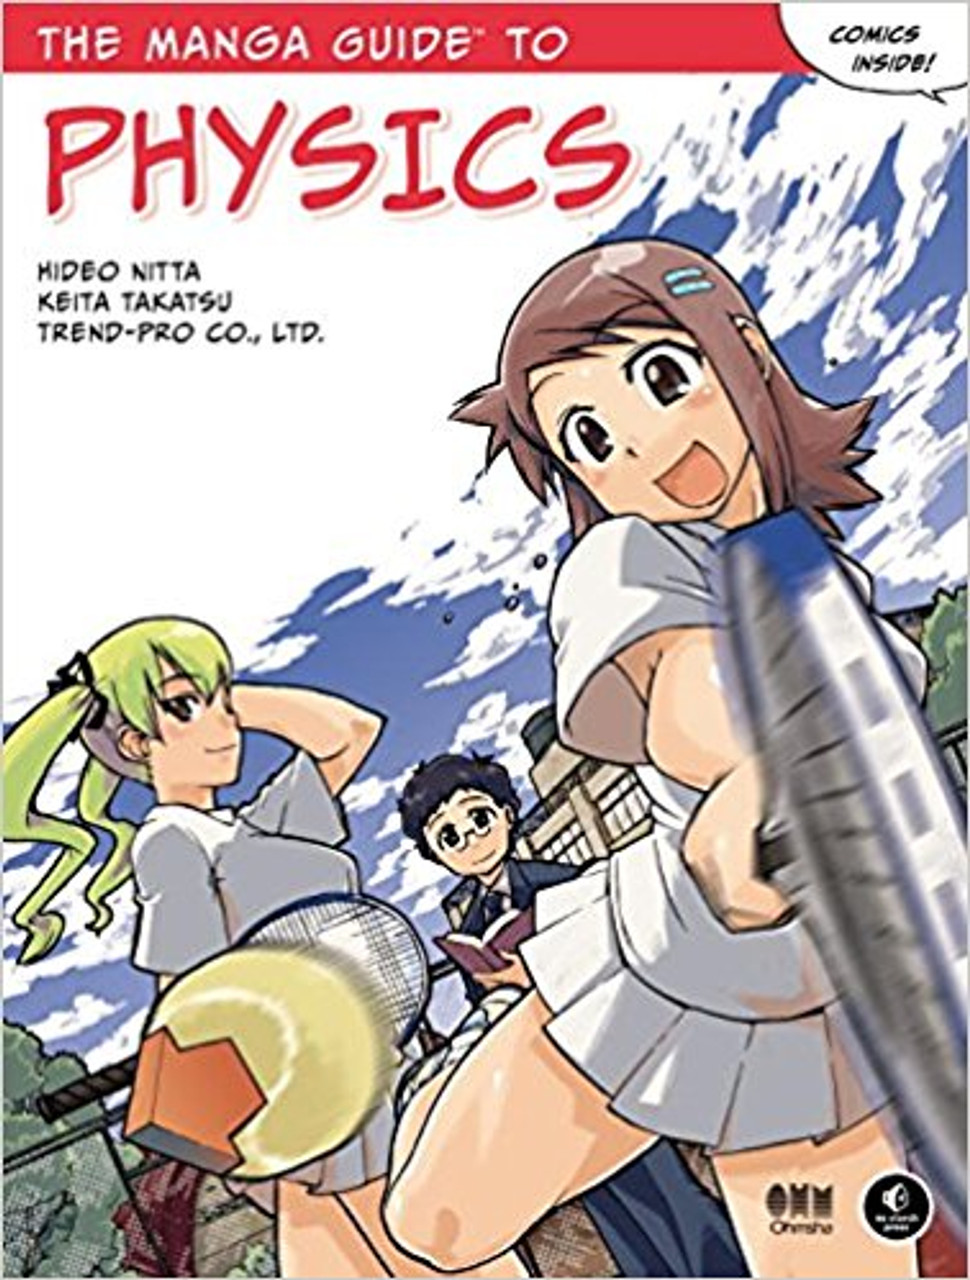 Megumi is an all-star athlete, but she's a failure when it comes to physics class. And she can't concentrate on her tennis matches when she's worried about the questions she missed on the big test! Luckily for her, she befriends Ryota, a patient physics geek who uses real-world examples to help her understand classical mechanics-and improve her tennis game in the process! In "The Manga Guide to Physics," you'll follow alongside Megumi as she learns about the physics of everyday objects like roller skates, slingshots, braking cars, and tennis serves. In no time, you'll master tough concepts like momentum and impulse, parabolic motion, and the relationship between force, mass, and acceleration.